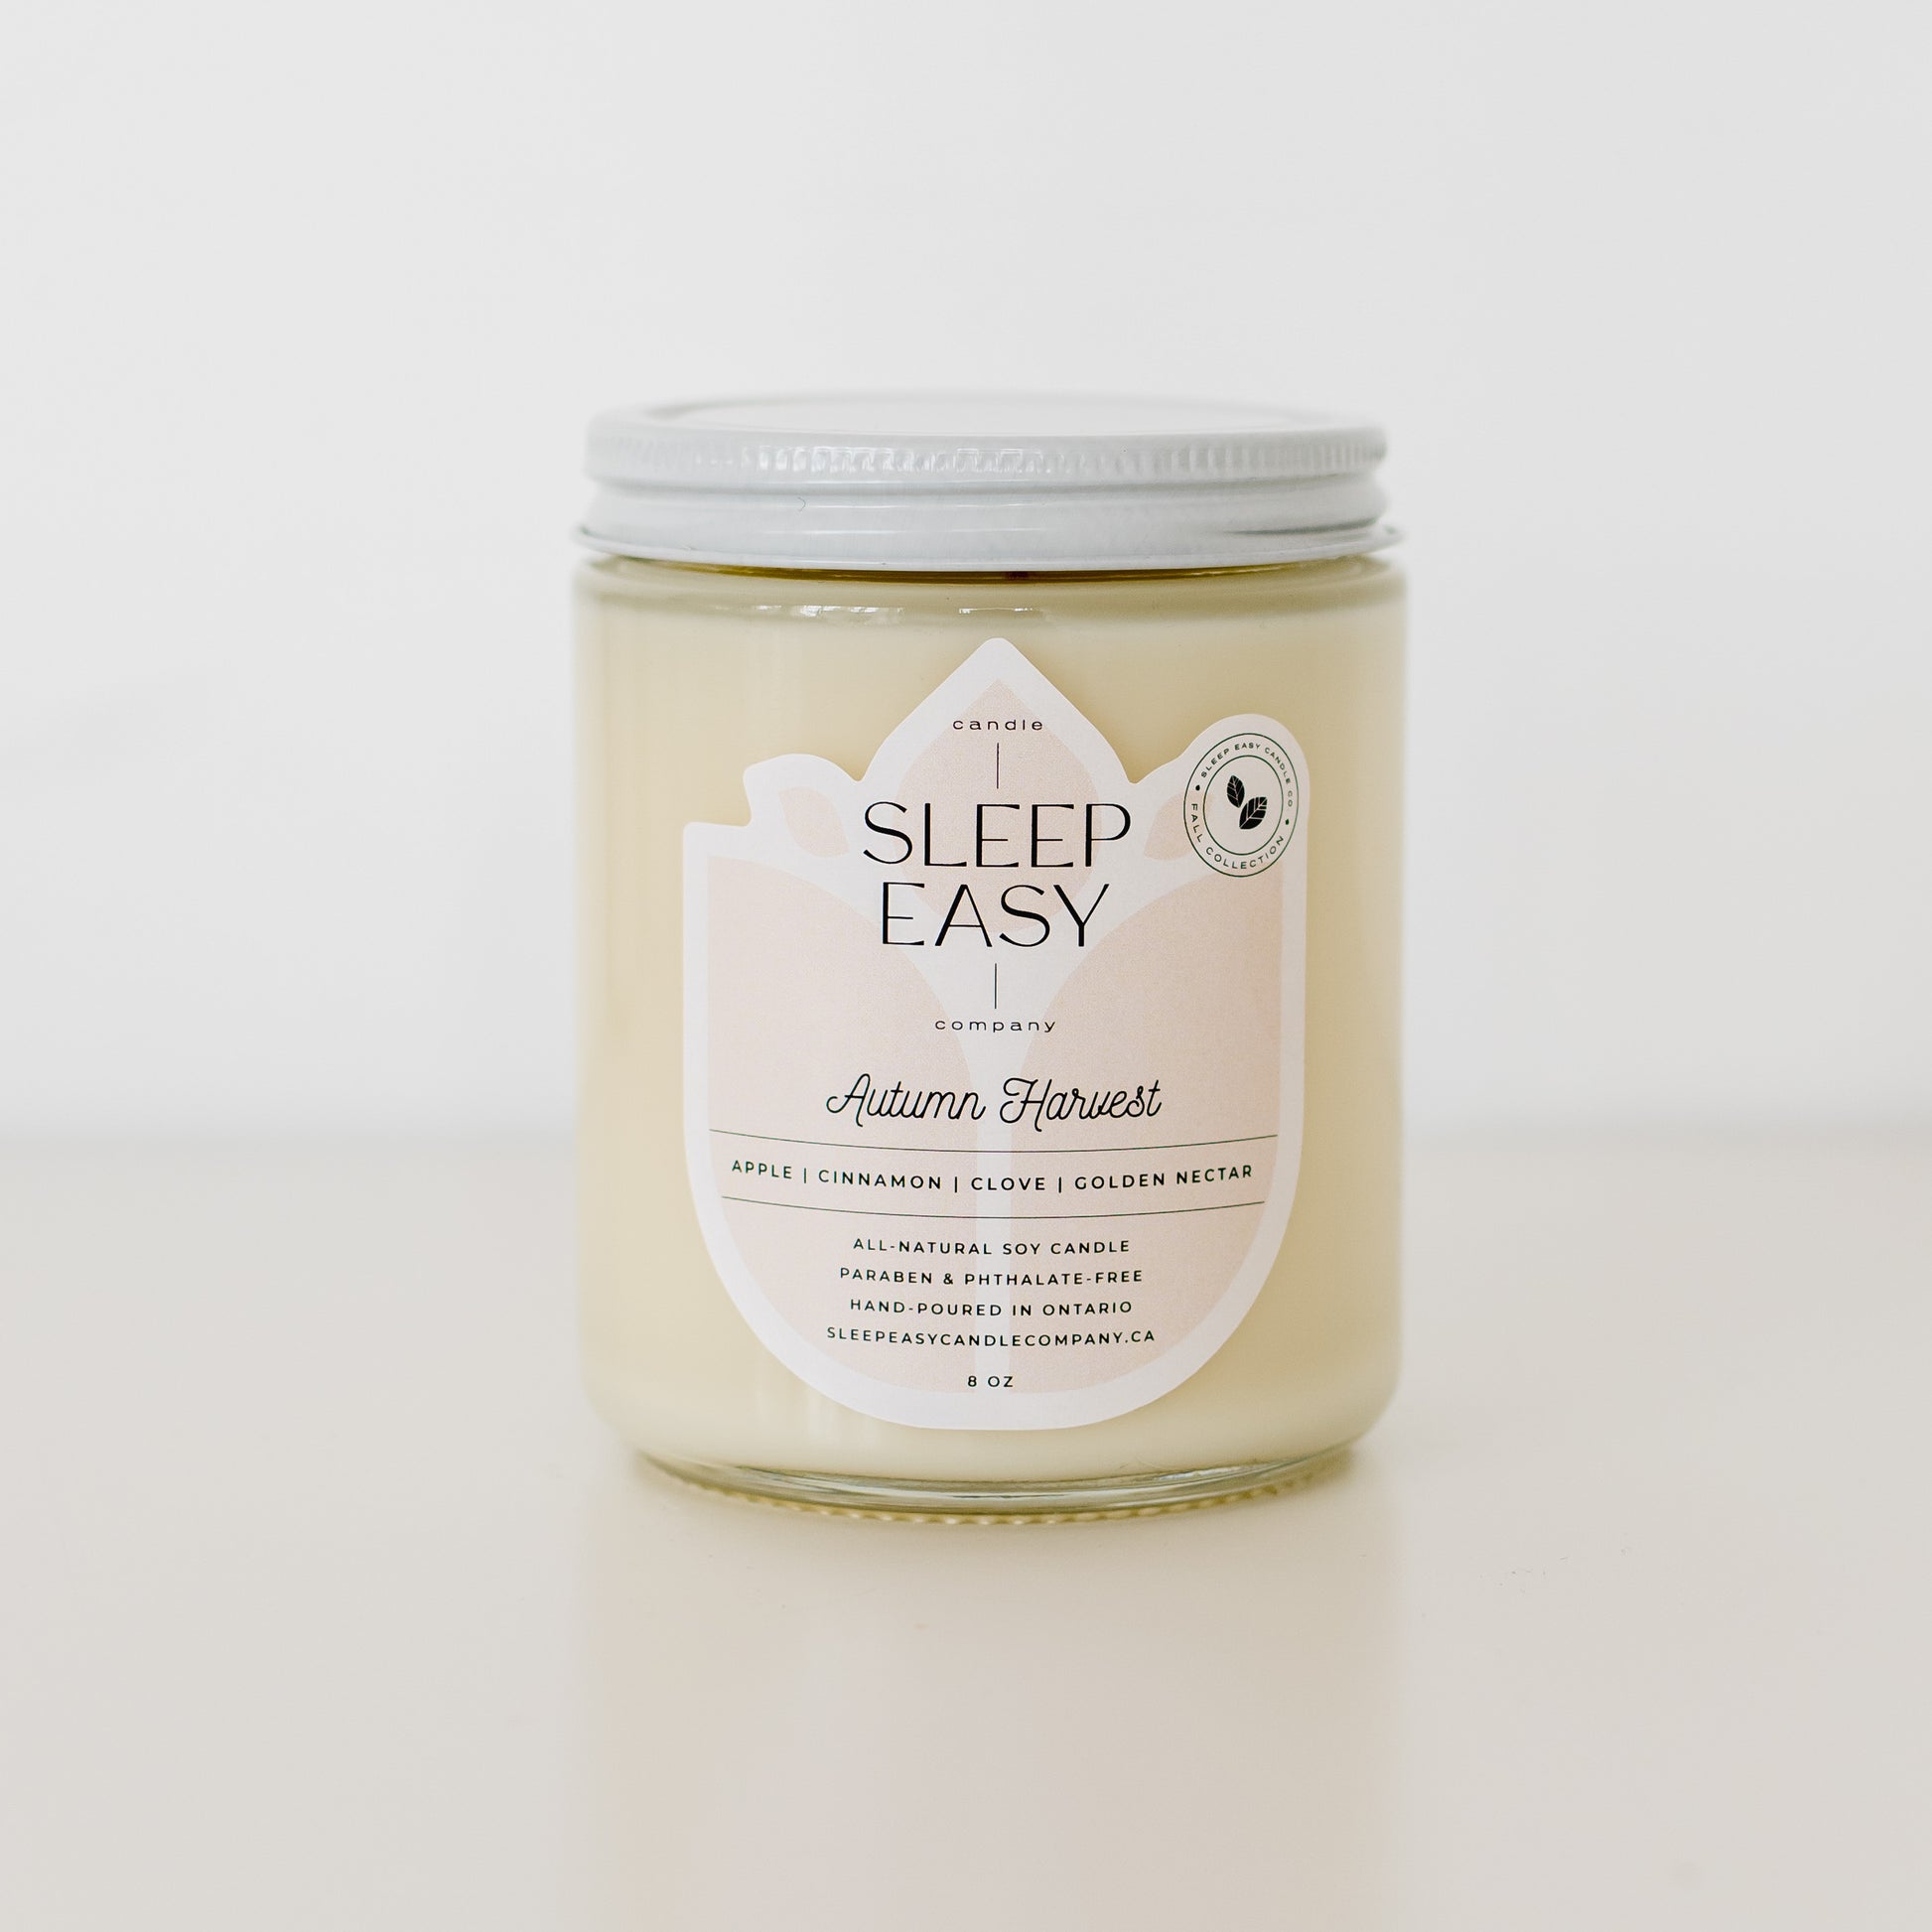 All natural soy candle, candles canada, fall collection, Autumn Harvest candle, soy candles canada, soy candles Ontario, soy candles Whitby, Ontario, scented candles,  handmade candles, small batch candles, soy candles eco friendly, soy candles online, paraben & phthalate free candles, 8oz candle, 